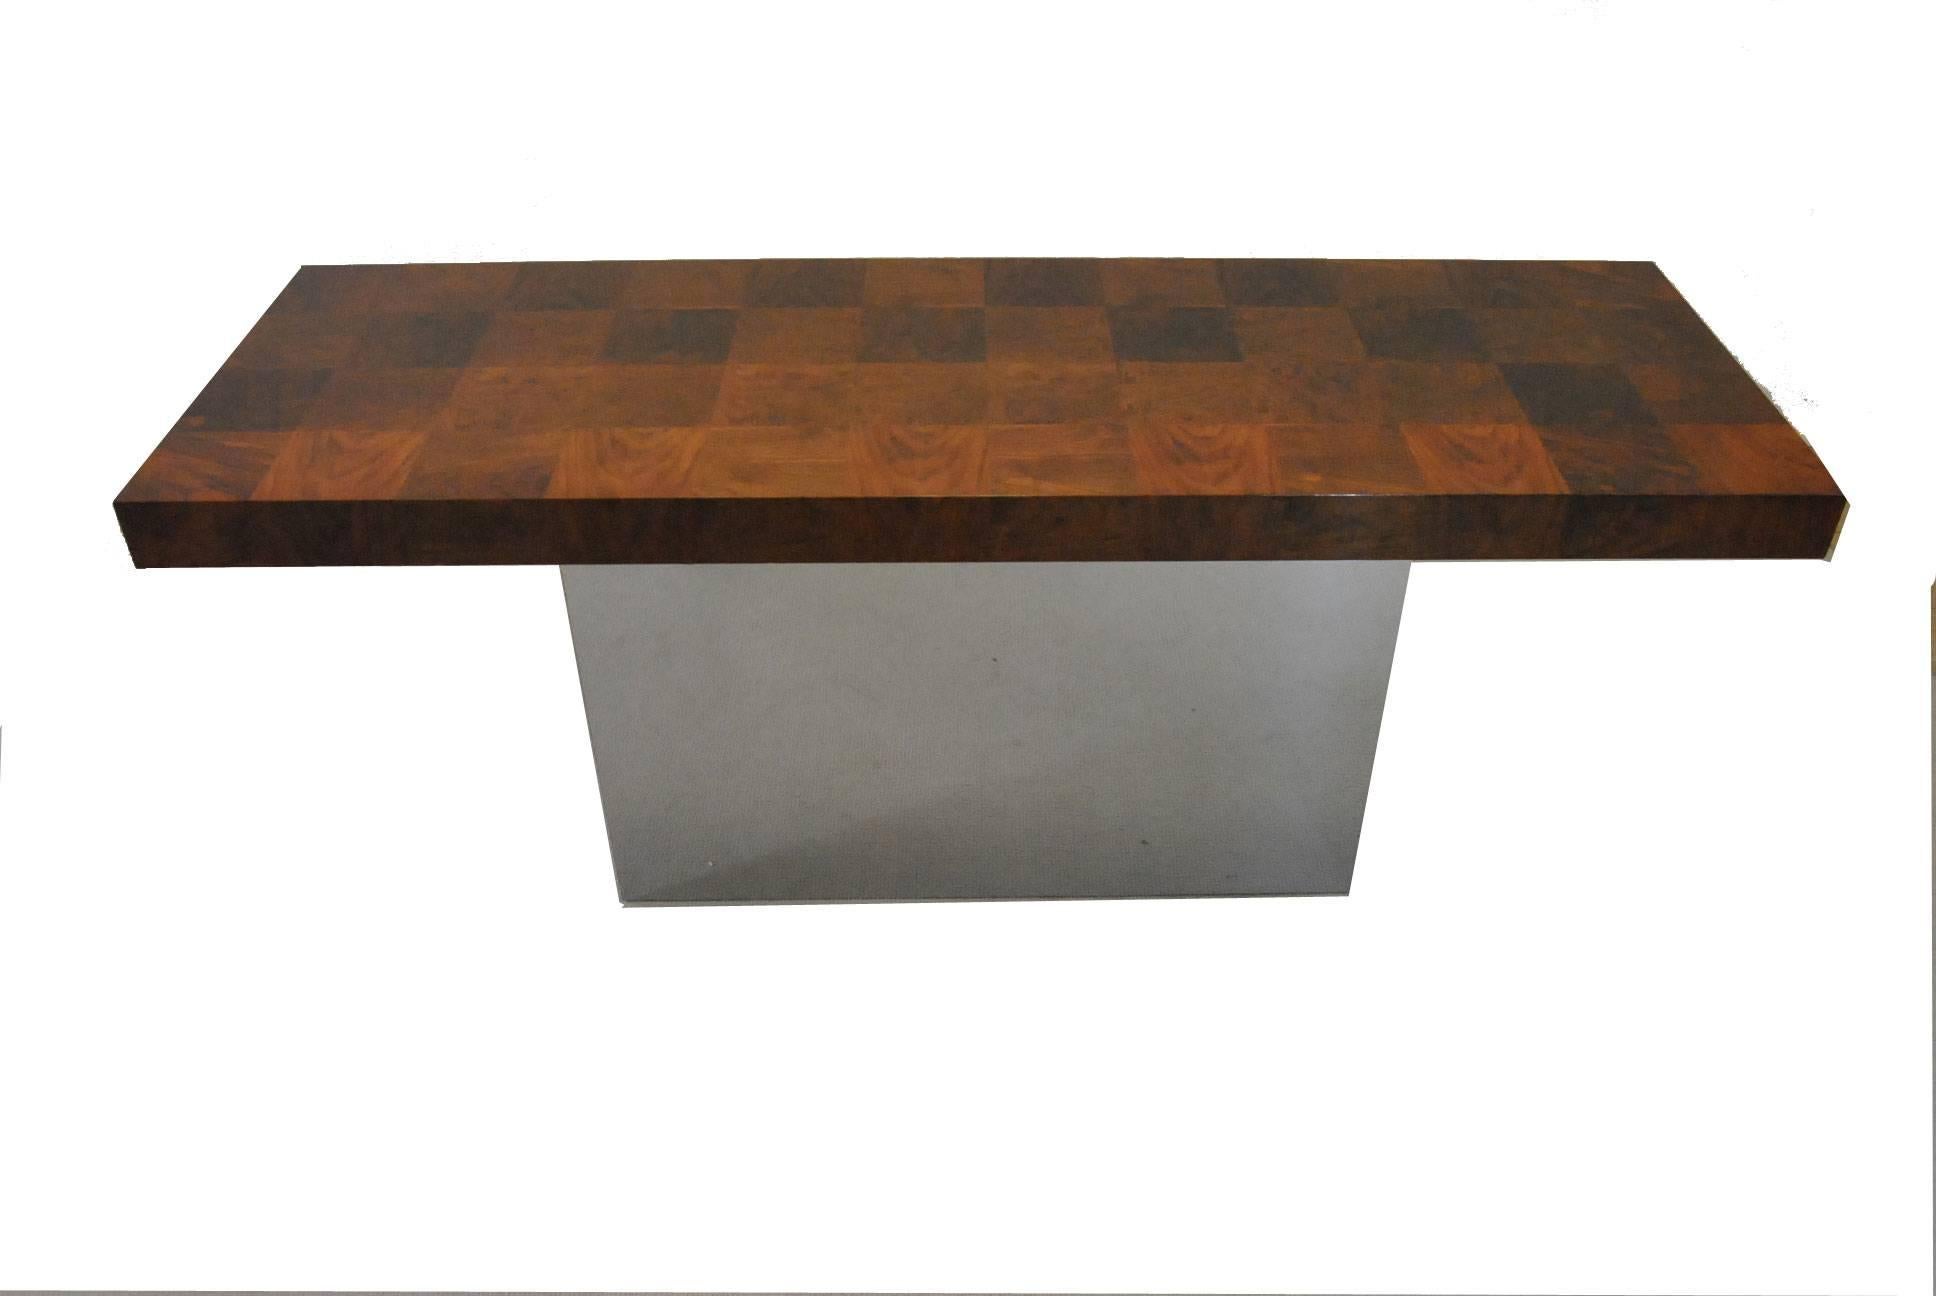 An unusual Mid-Century console table designed by Milo Baughman for Thayer Coggin. This table is circa 1970's and features a walnut parquetry patchwork top with original finish. The base is polished chrome in a rectangular shape. Great, clean lines